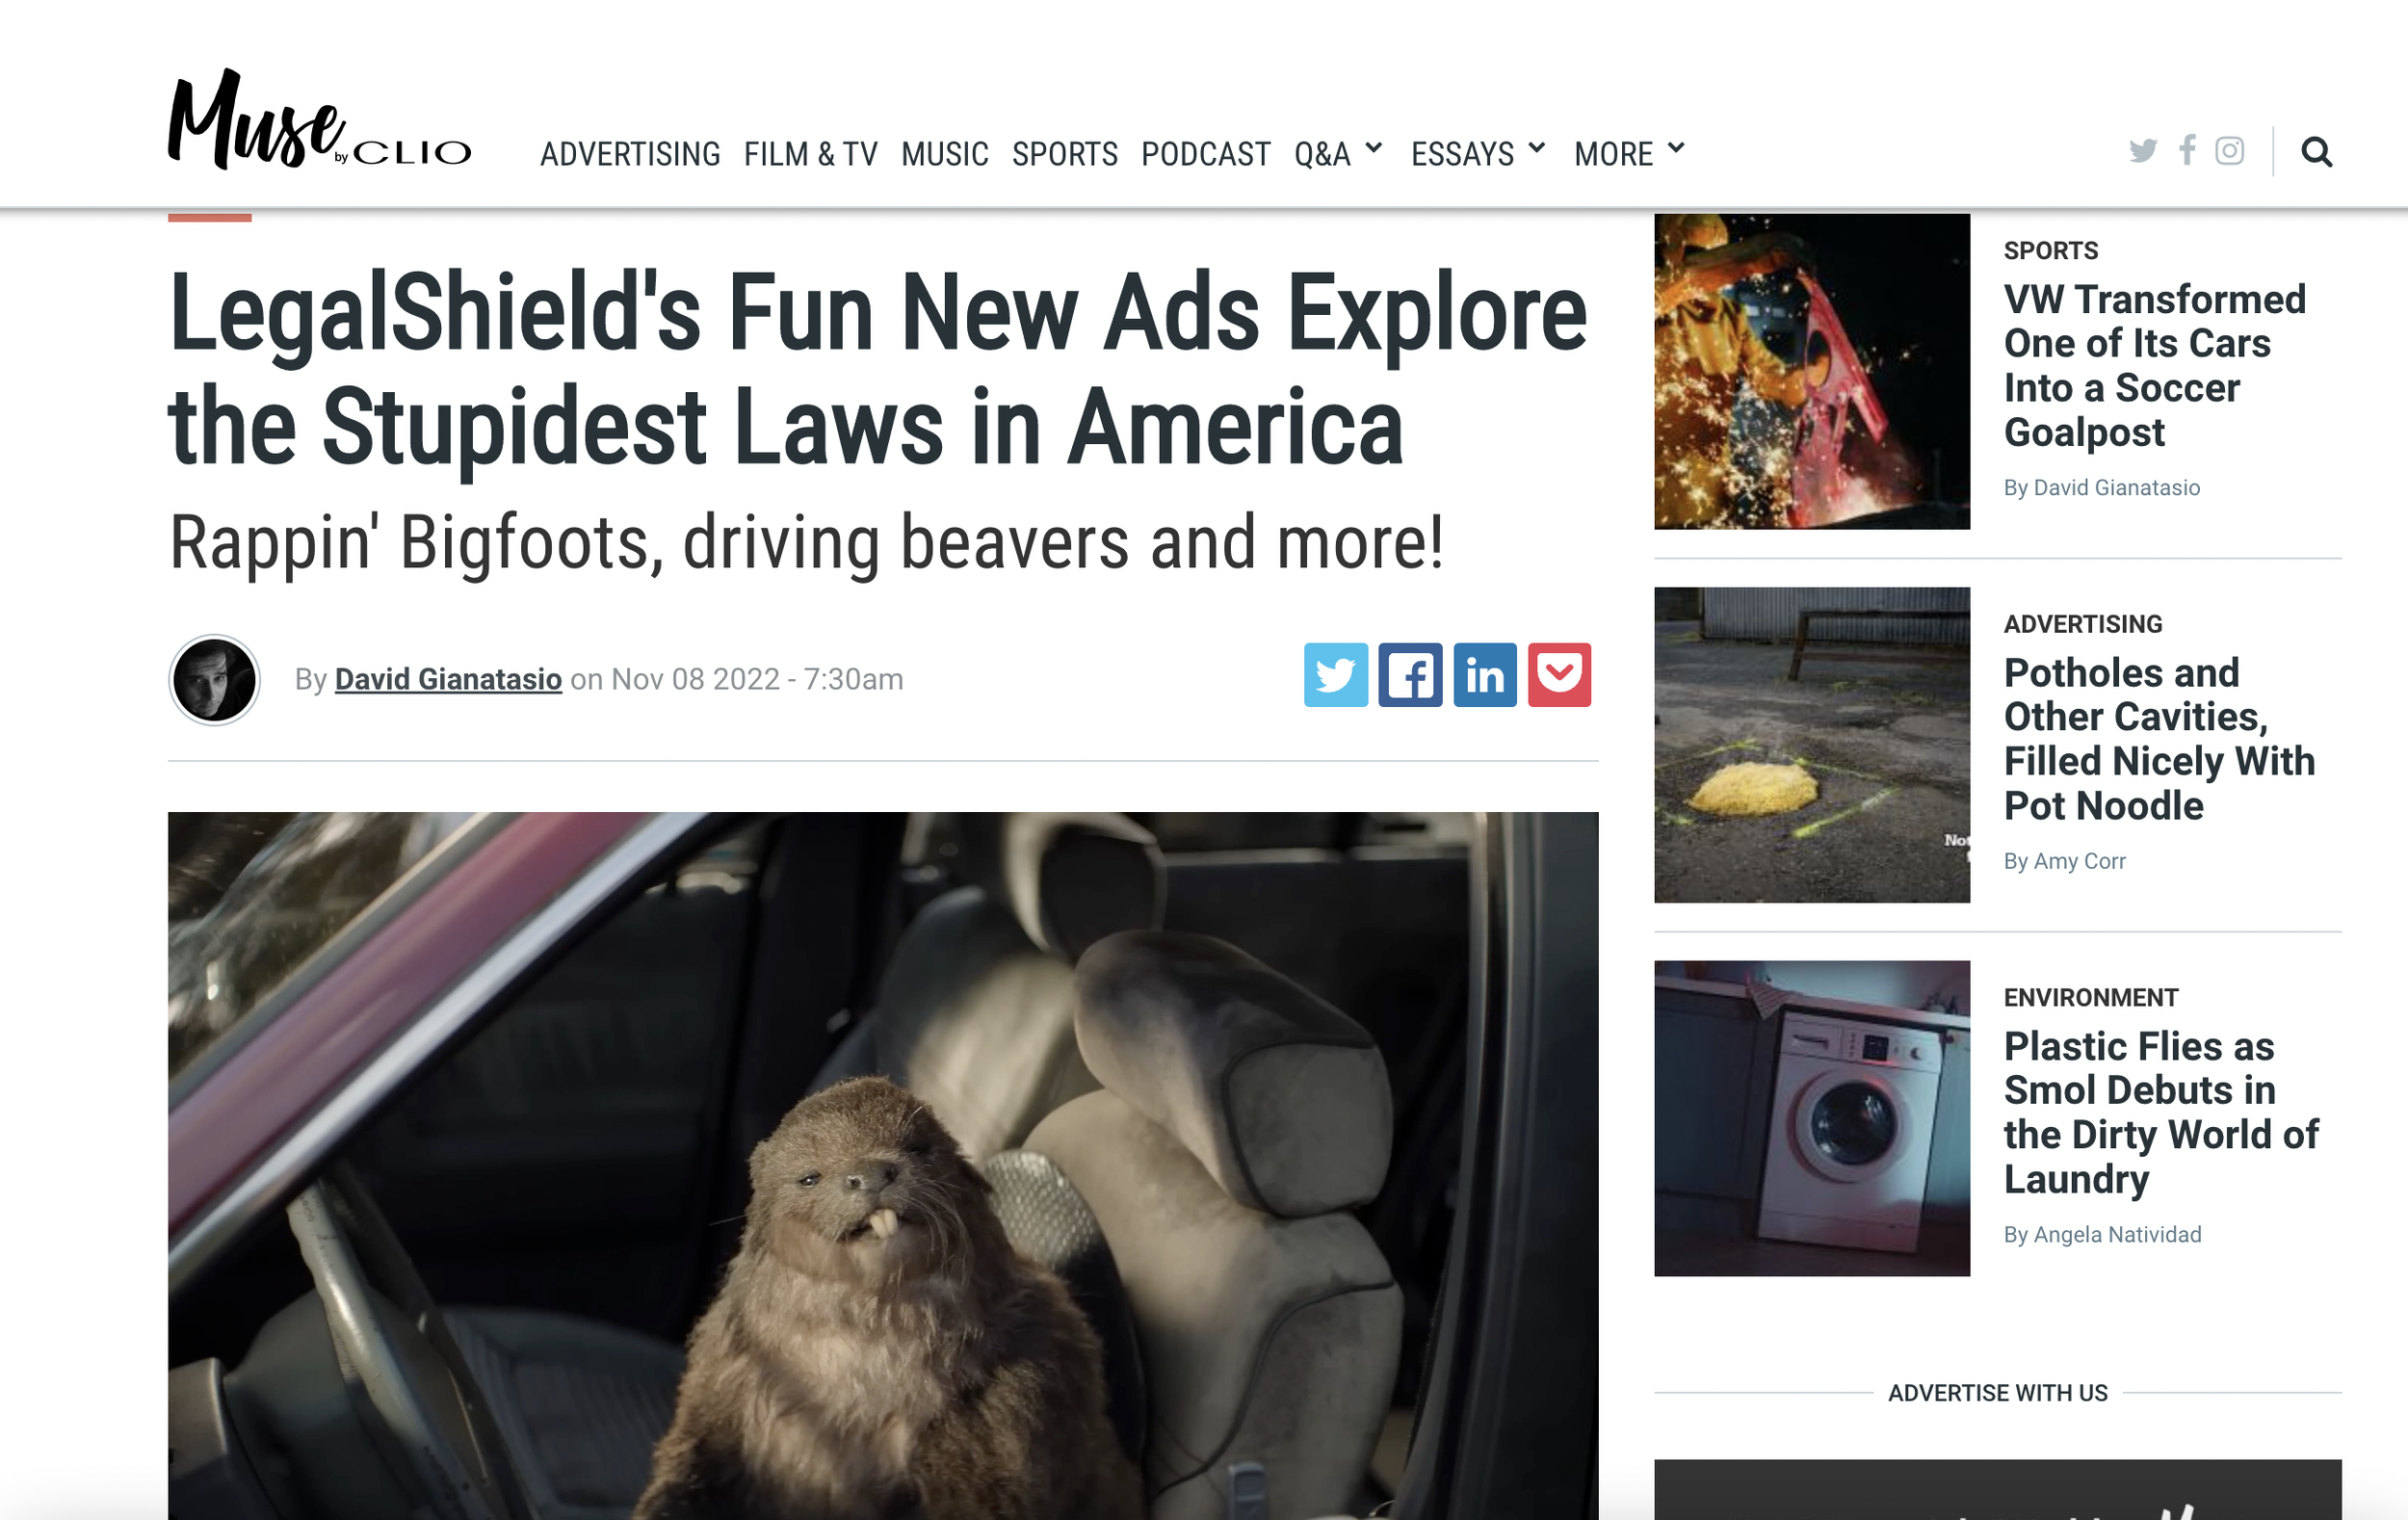 LegalShield's Fun New Ads Explore the Stupidest Laws in America